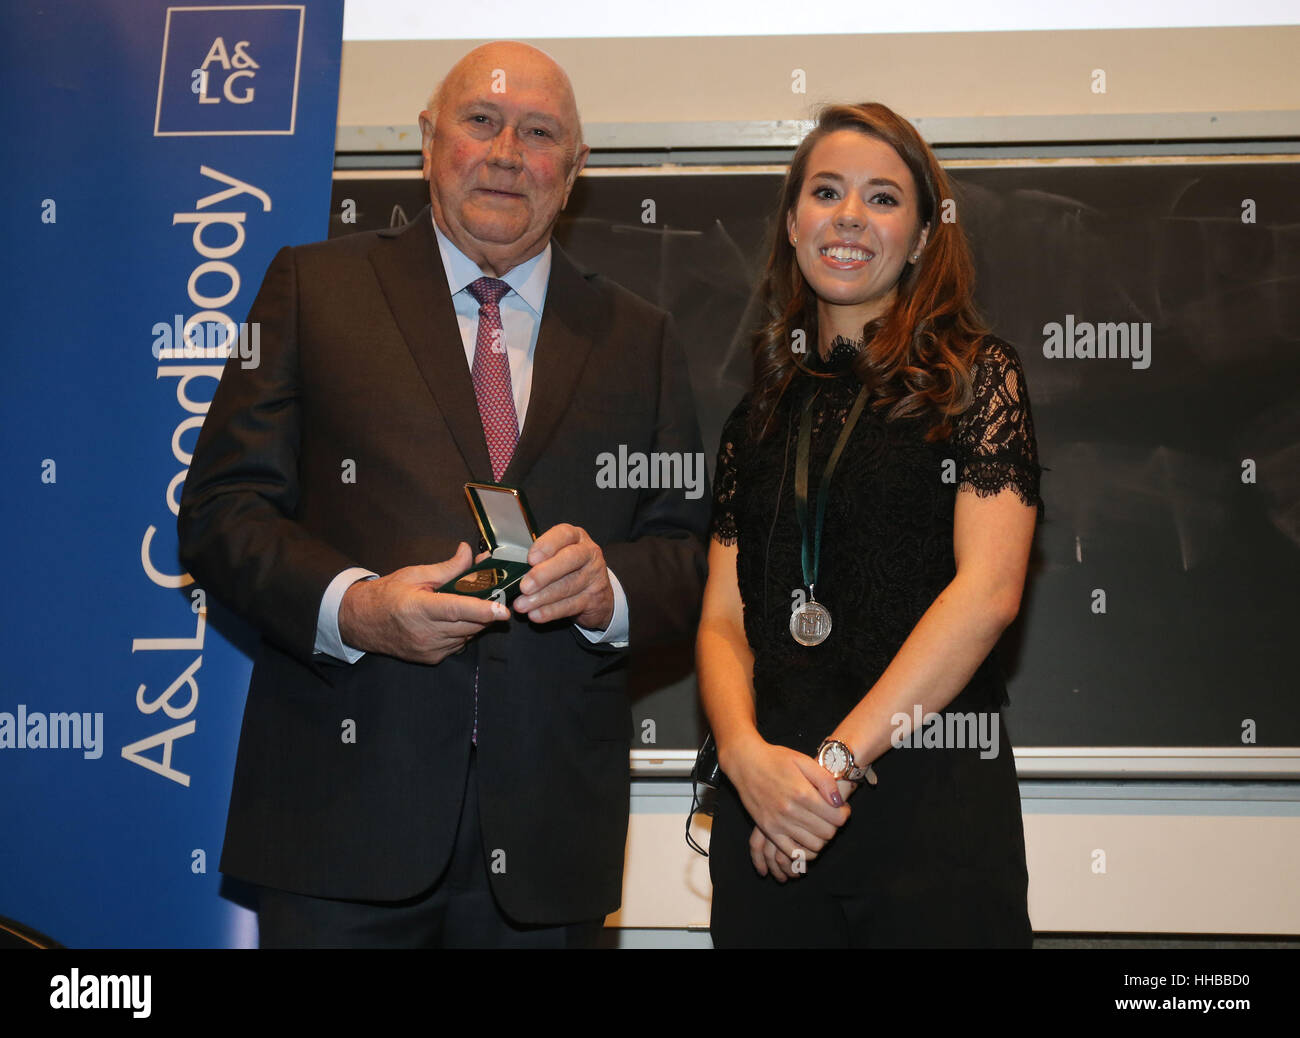 Nobel Peace Prize winner FW de Klerk is presented with the Praeses Elit Award by Auditor Hilary Hogan at Trinity College in Dublin as a recognition of his key role in ending apartheid and his outstanding contribution to reconciliation in South Africa. Stock Photo